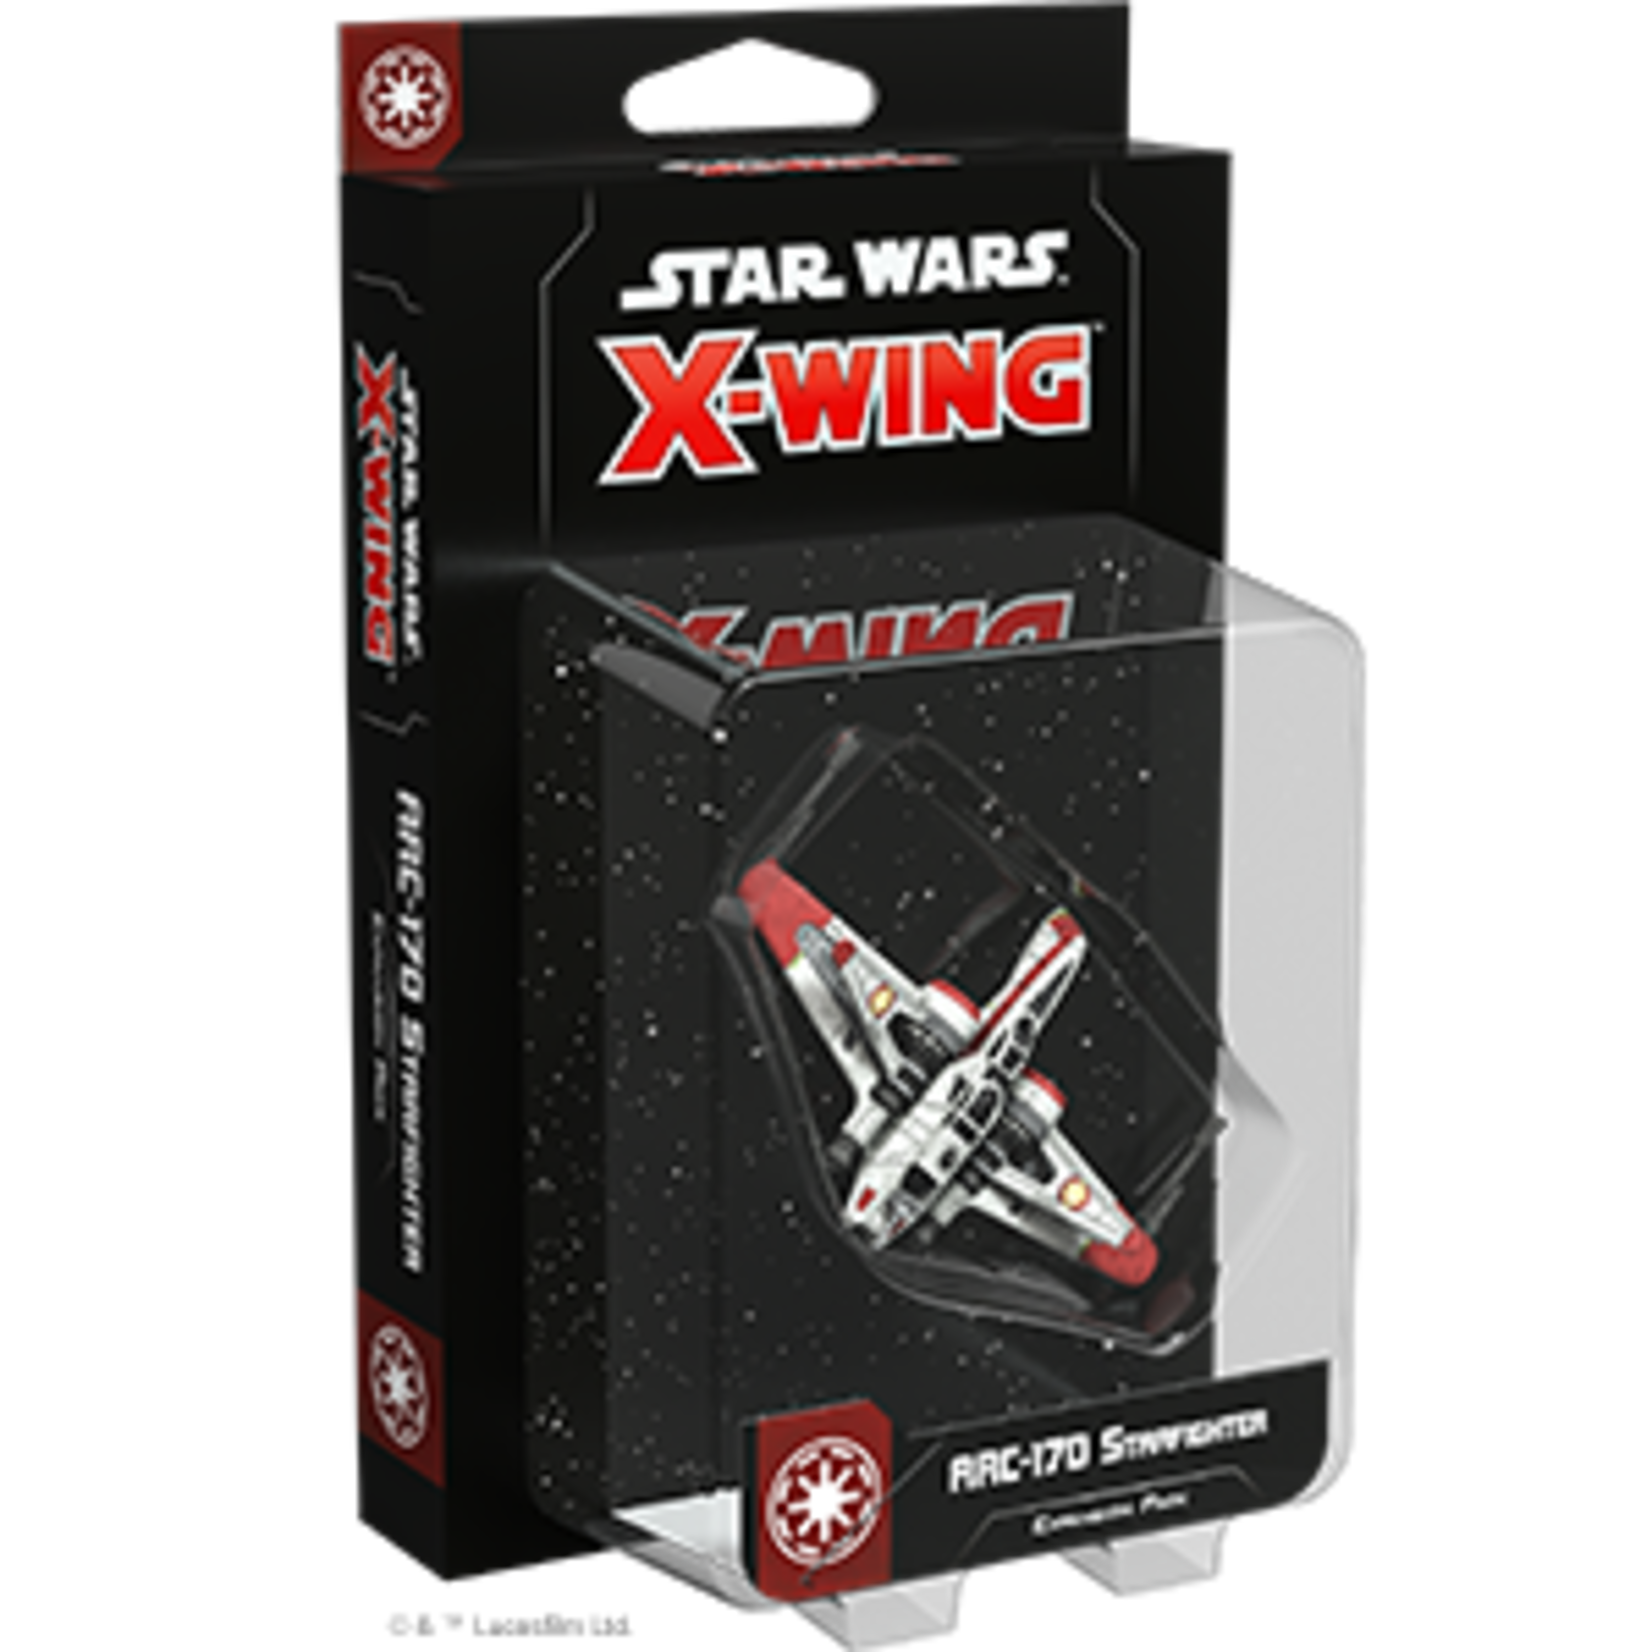 Fantasy Flight Games Star Wars X-Wing: 2nd Edition - ARC-170 Starfighter Expansion Pack